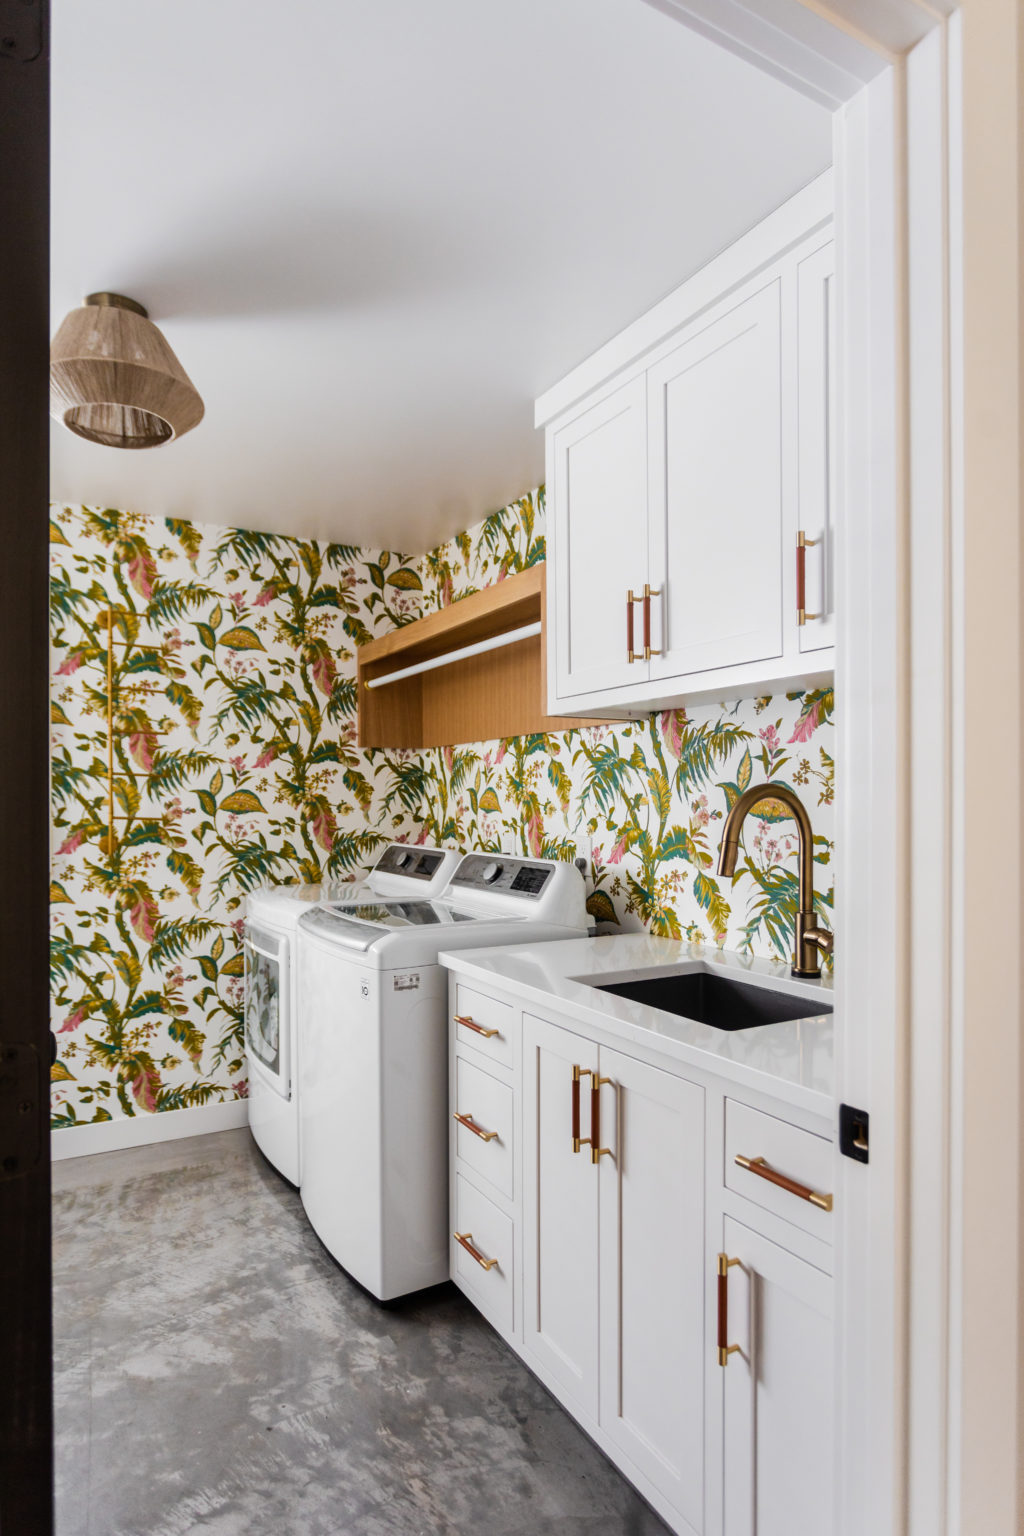 The Bradford, Laundry Room + Office Reveal | Before & After ...